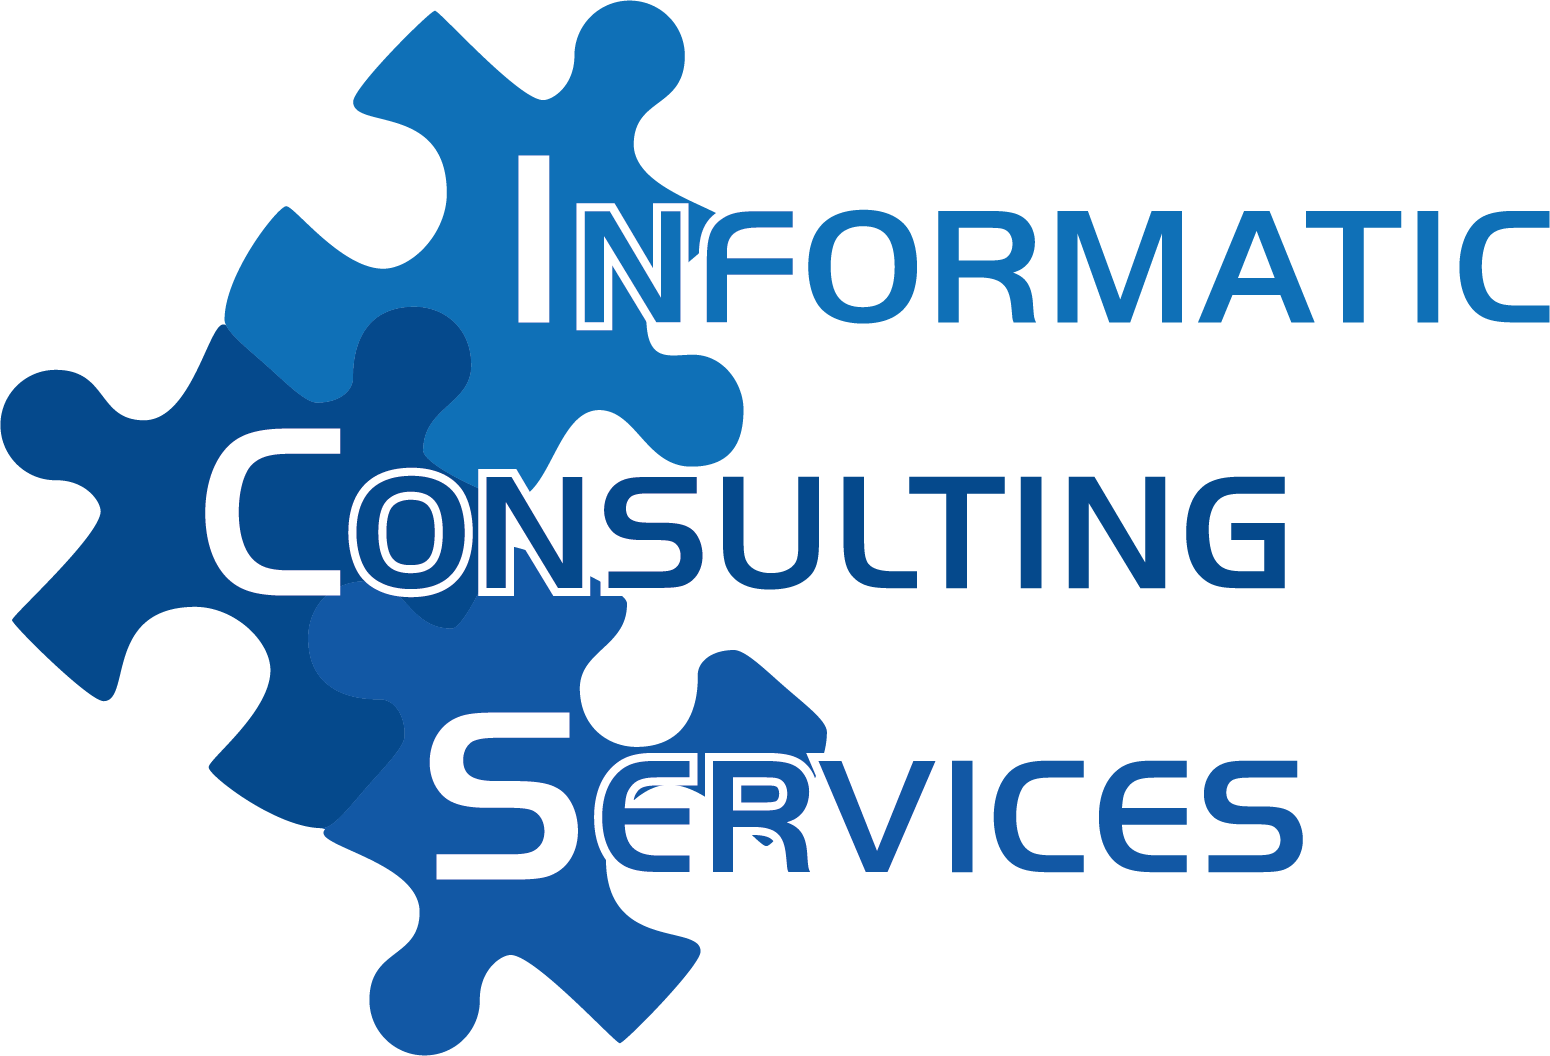 Informatic Consulting Services S.A.S.